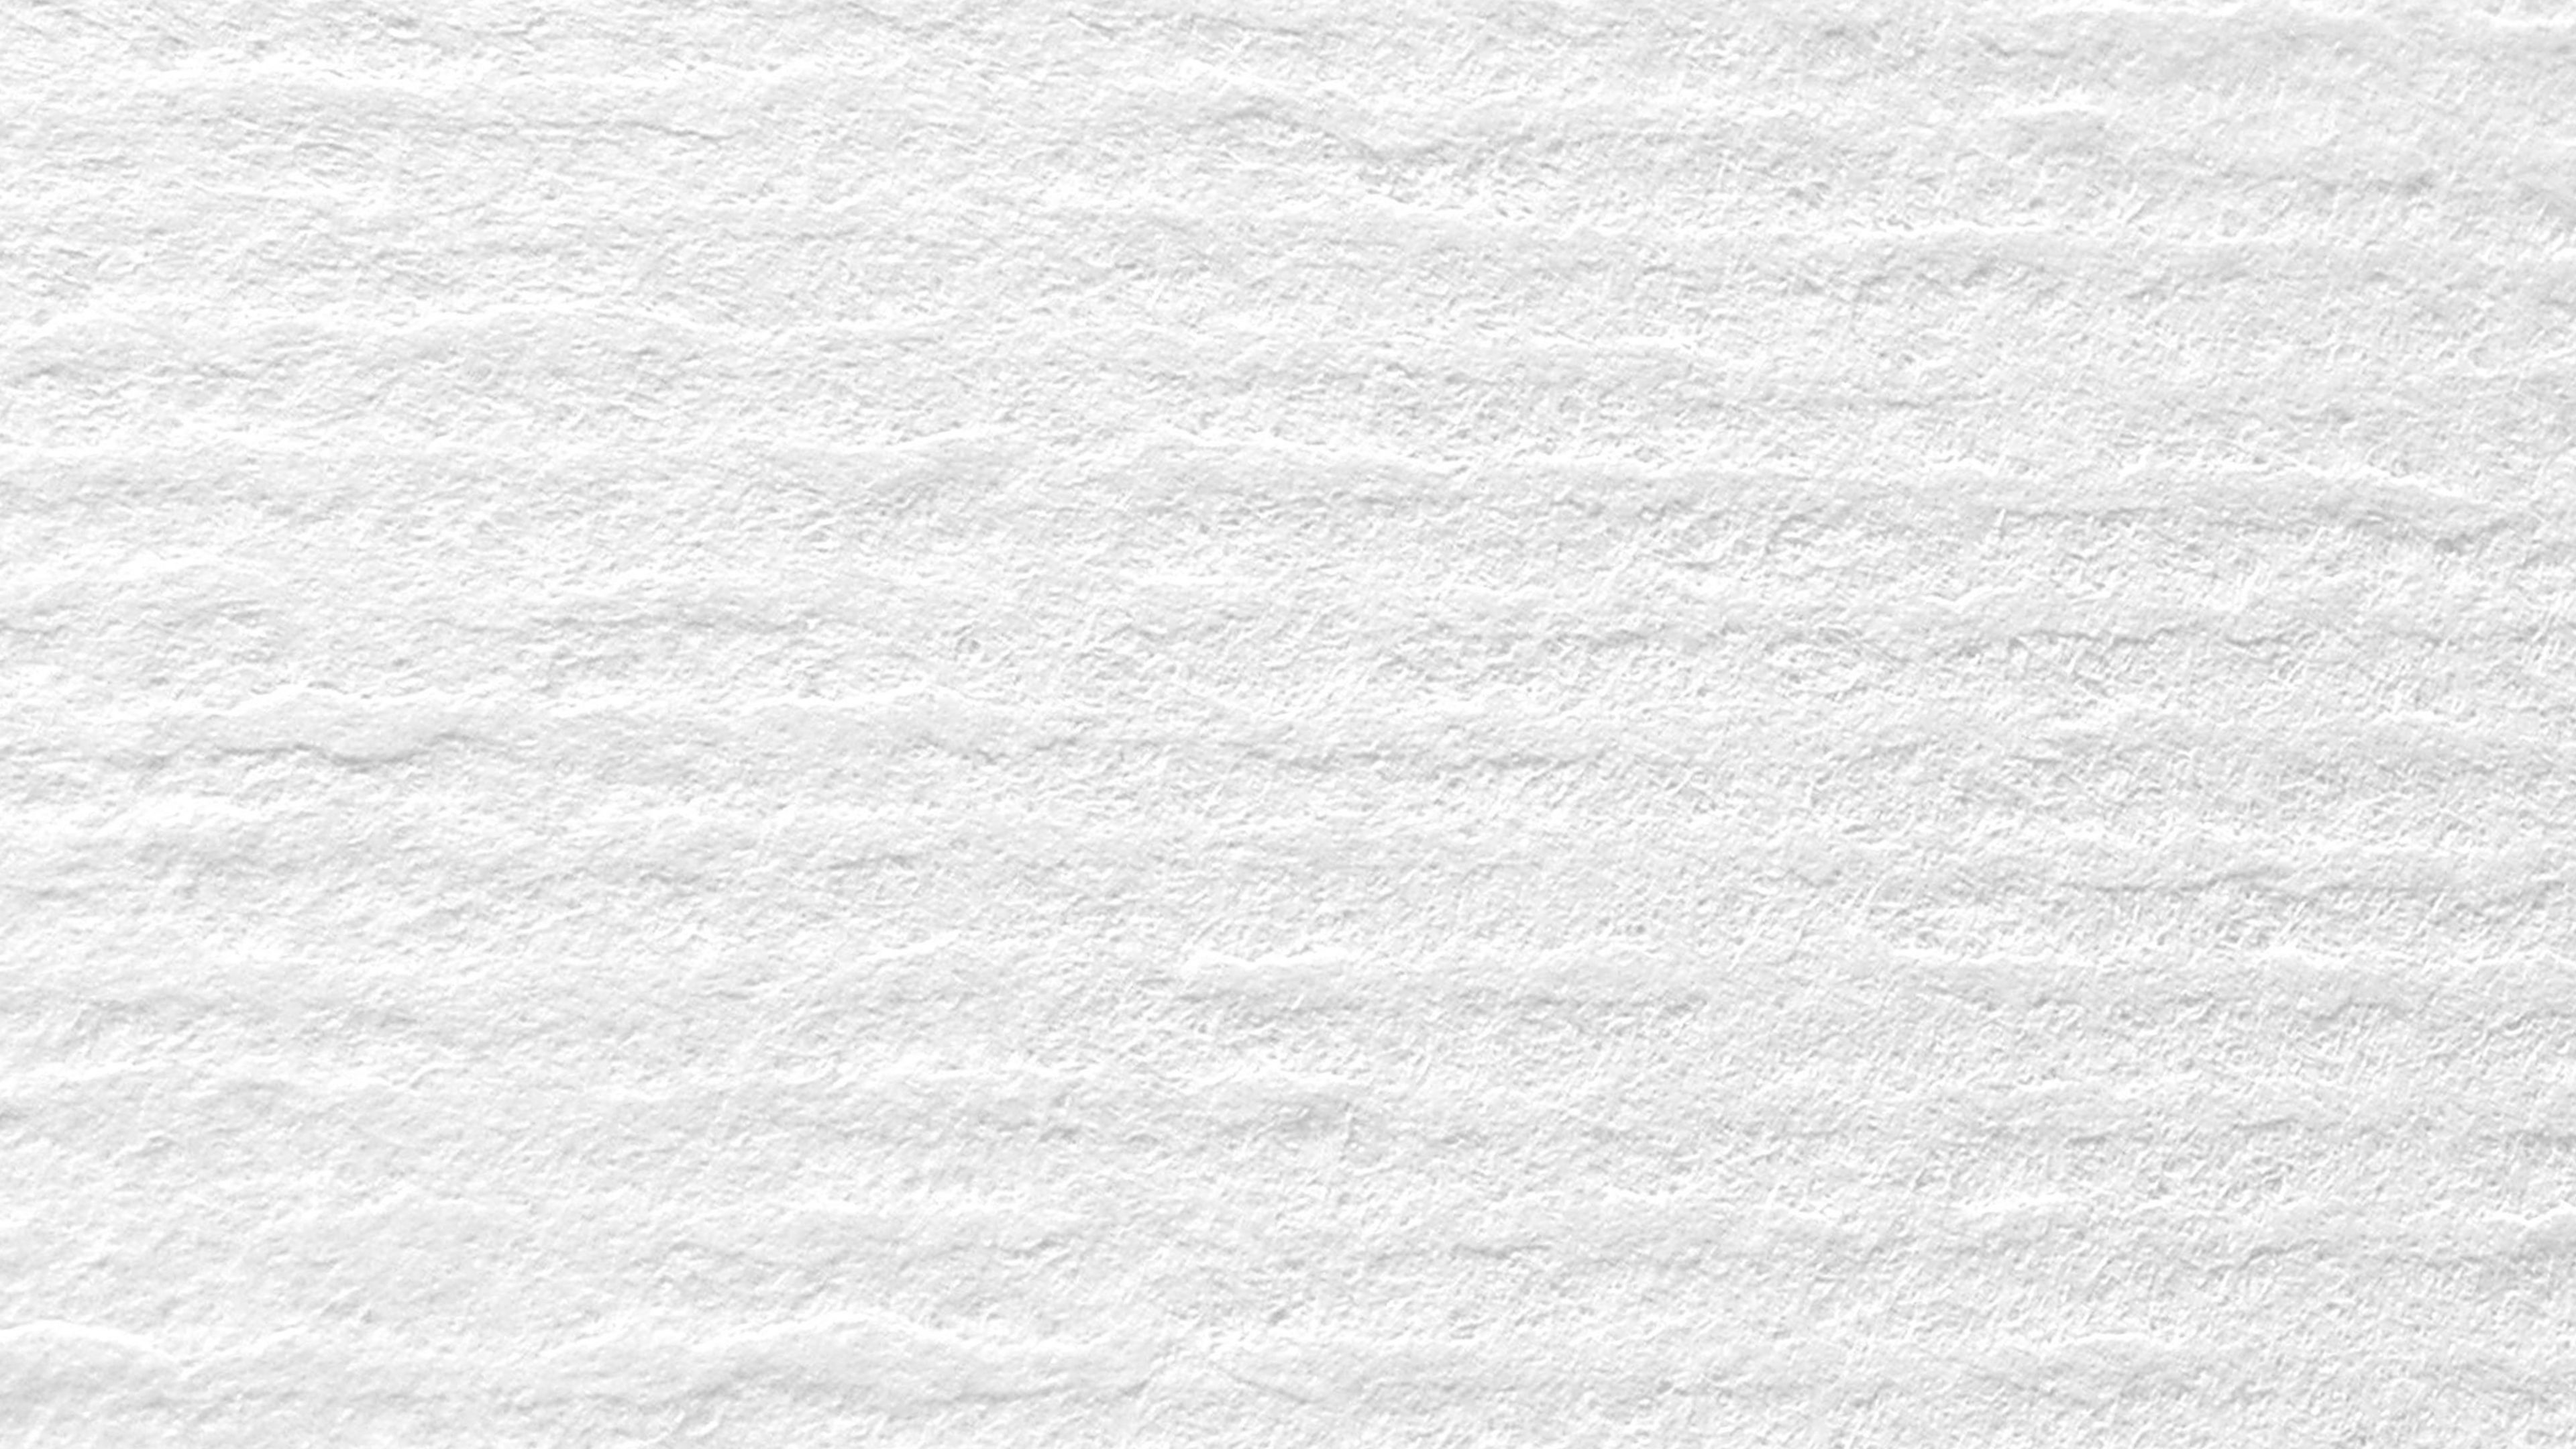 Download wallpaper 3840x2160 texture, wall, white, surface 4k uhd 16:9 HD background